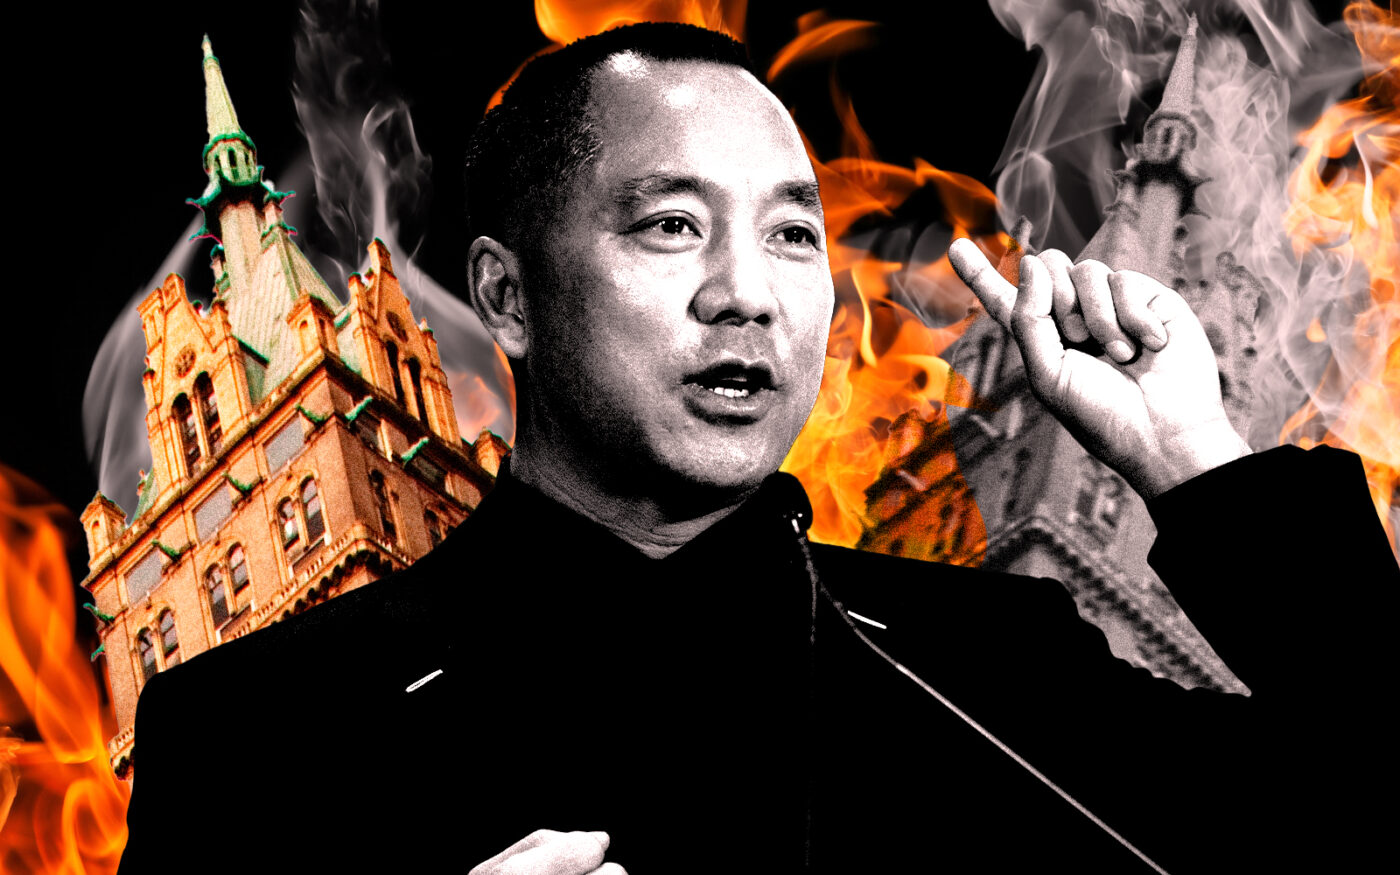 A photo illustration of Guo Wengui and 781 Fifth Avenue (Getty, Tony Hisgett; cropped by Beyond My Ken, CC BY 2.0 - via Wikimedia Commons)